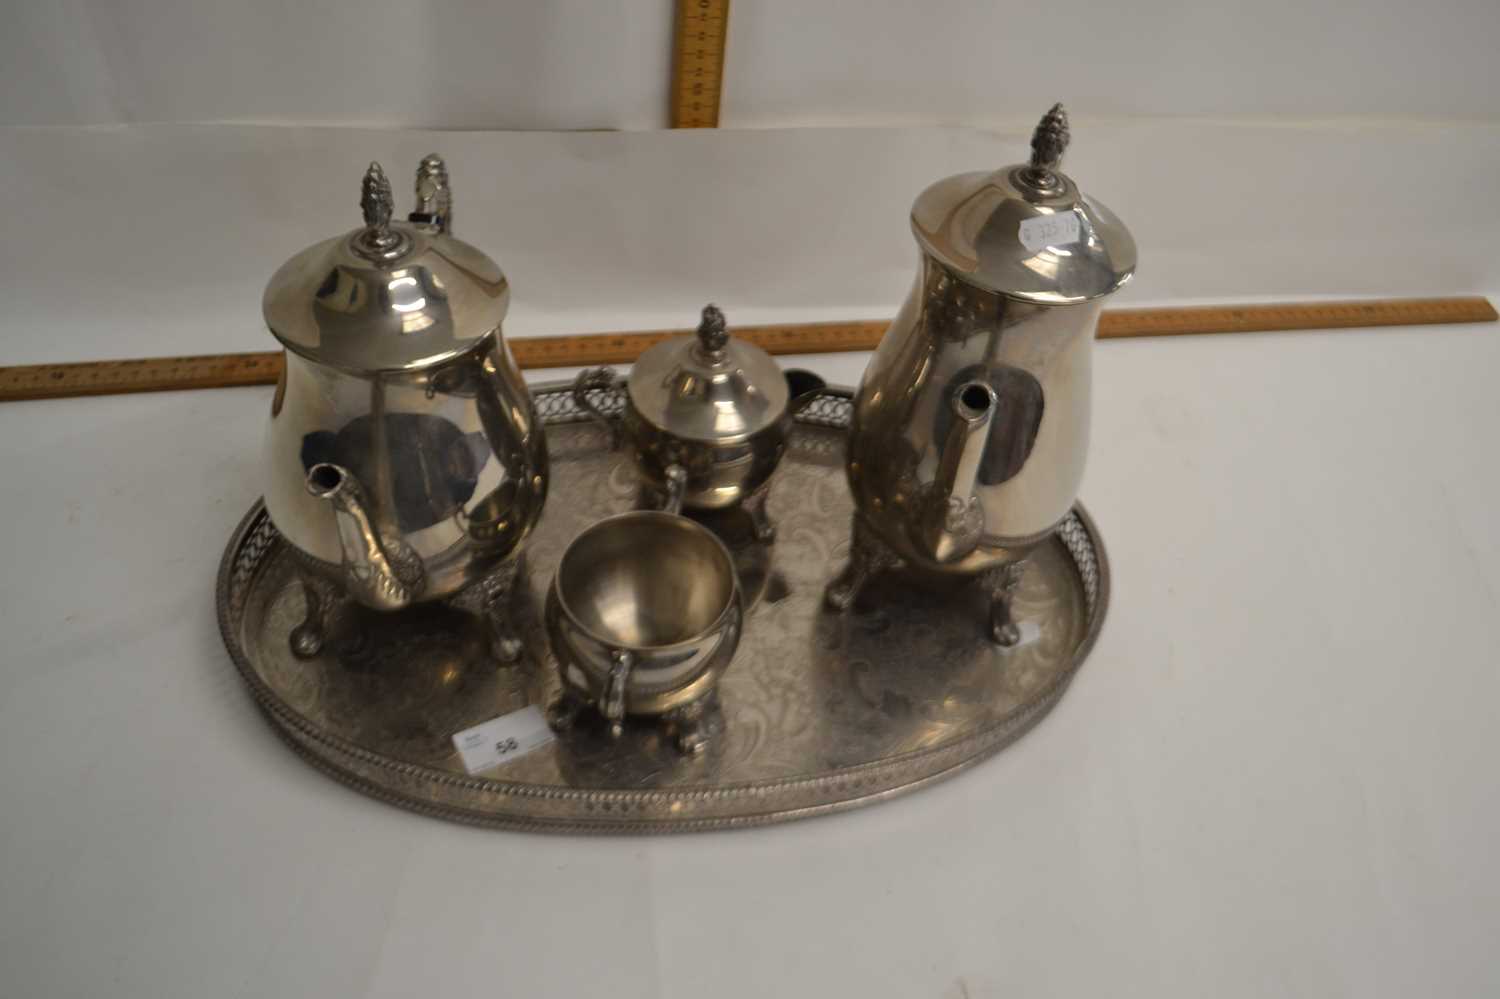 Silver plated tea set with tray